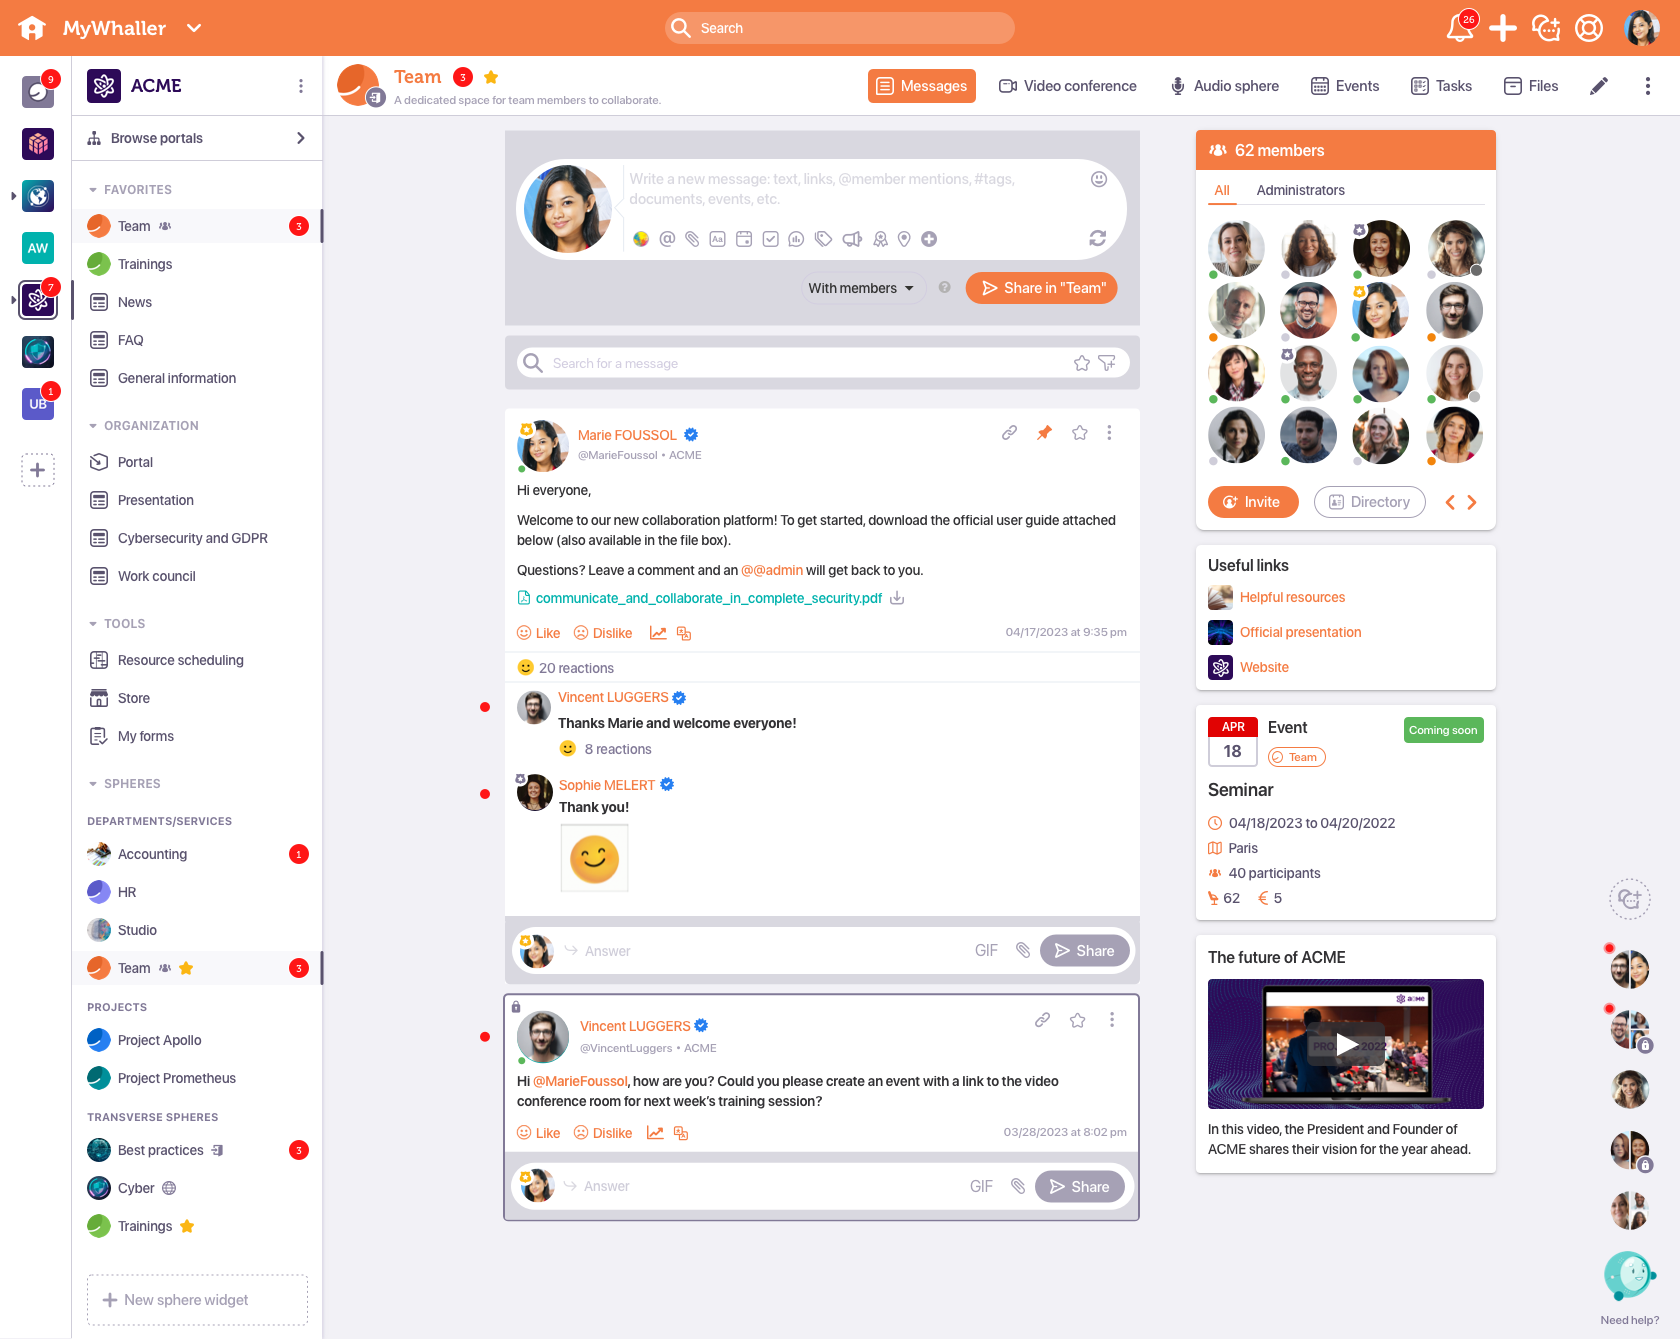 Whaller "spheres" (independent discussion spaces) allow members to communicate and collaborate in complete security. They include a variety of tools: messages, video conferencing, document storage & co-editing, shared calendar, task Kanban,...